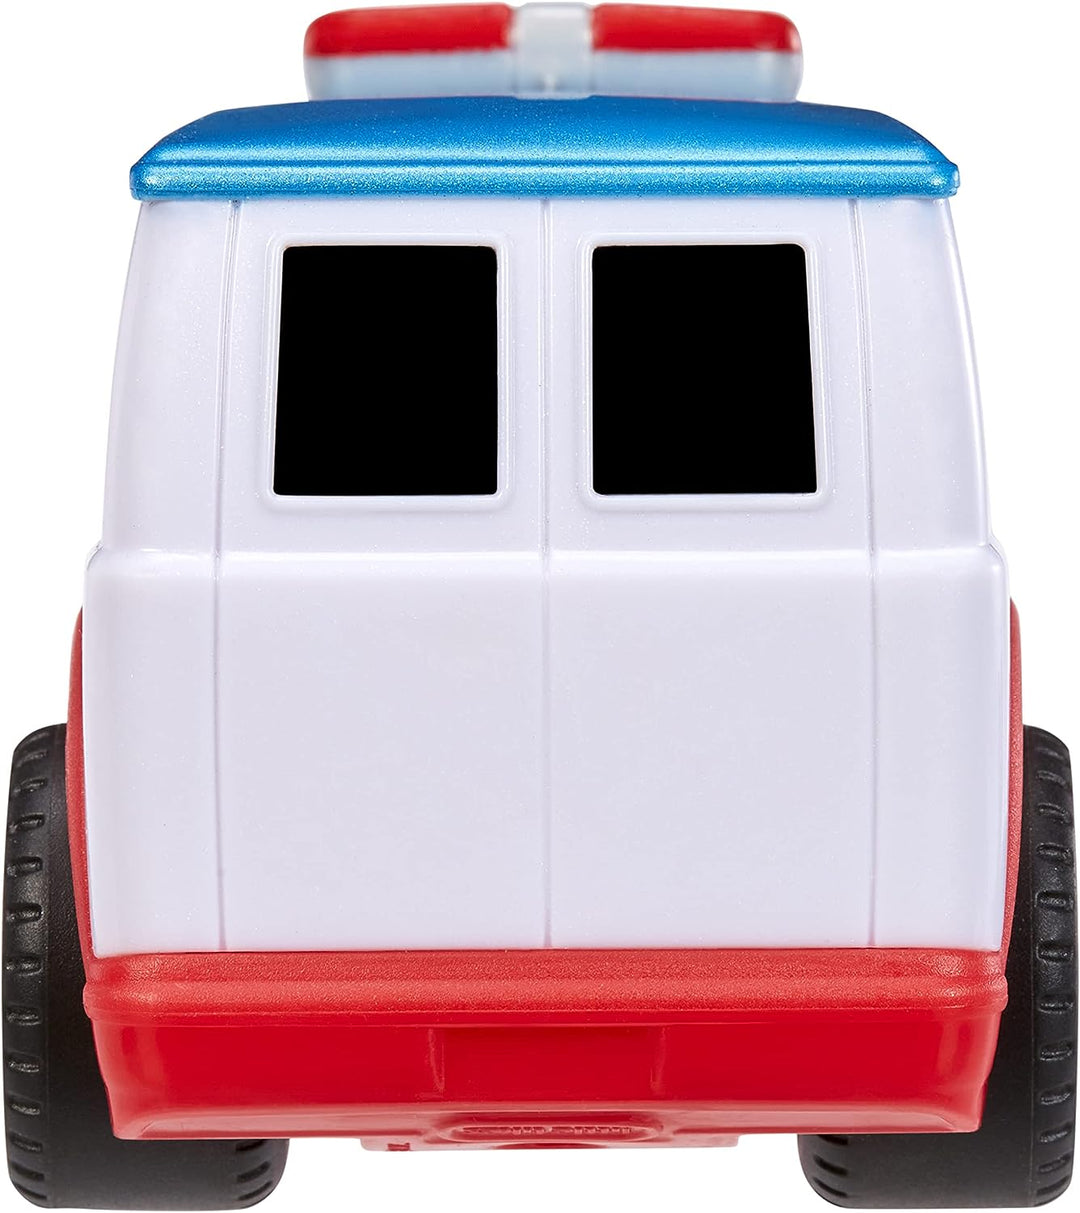 Little Tikes My First Cars Crazy Fast Cars - RACIN' RESPONDERS 2-PACK - Emergency Themed Pullback Toy Vehicles